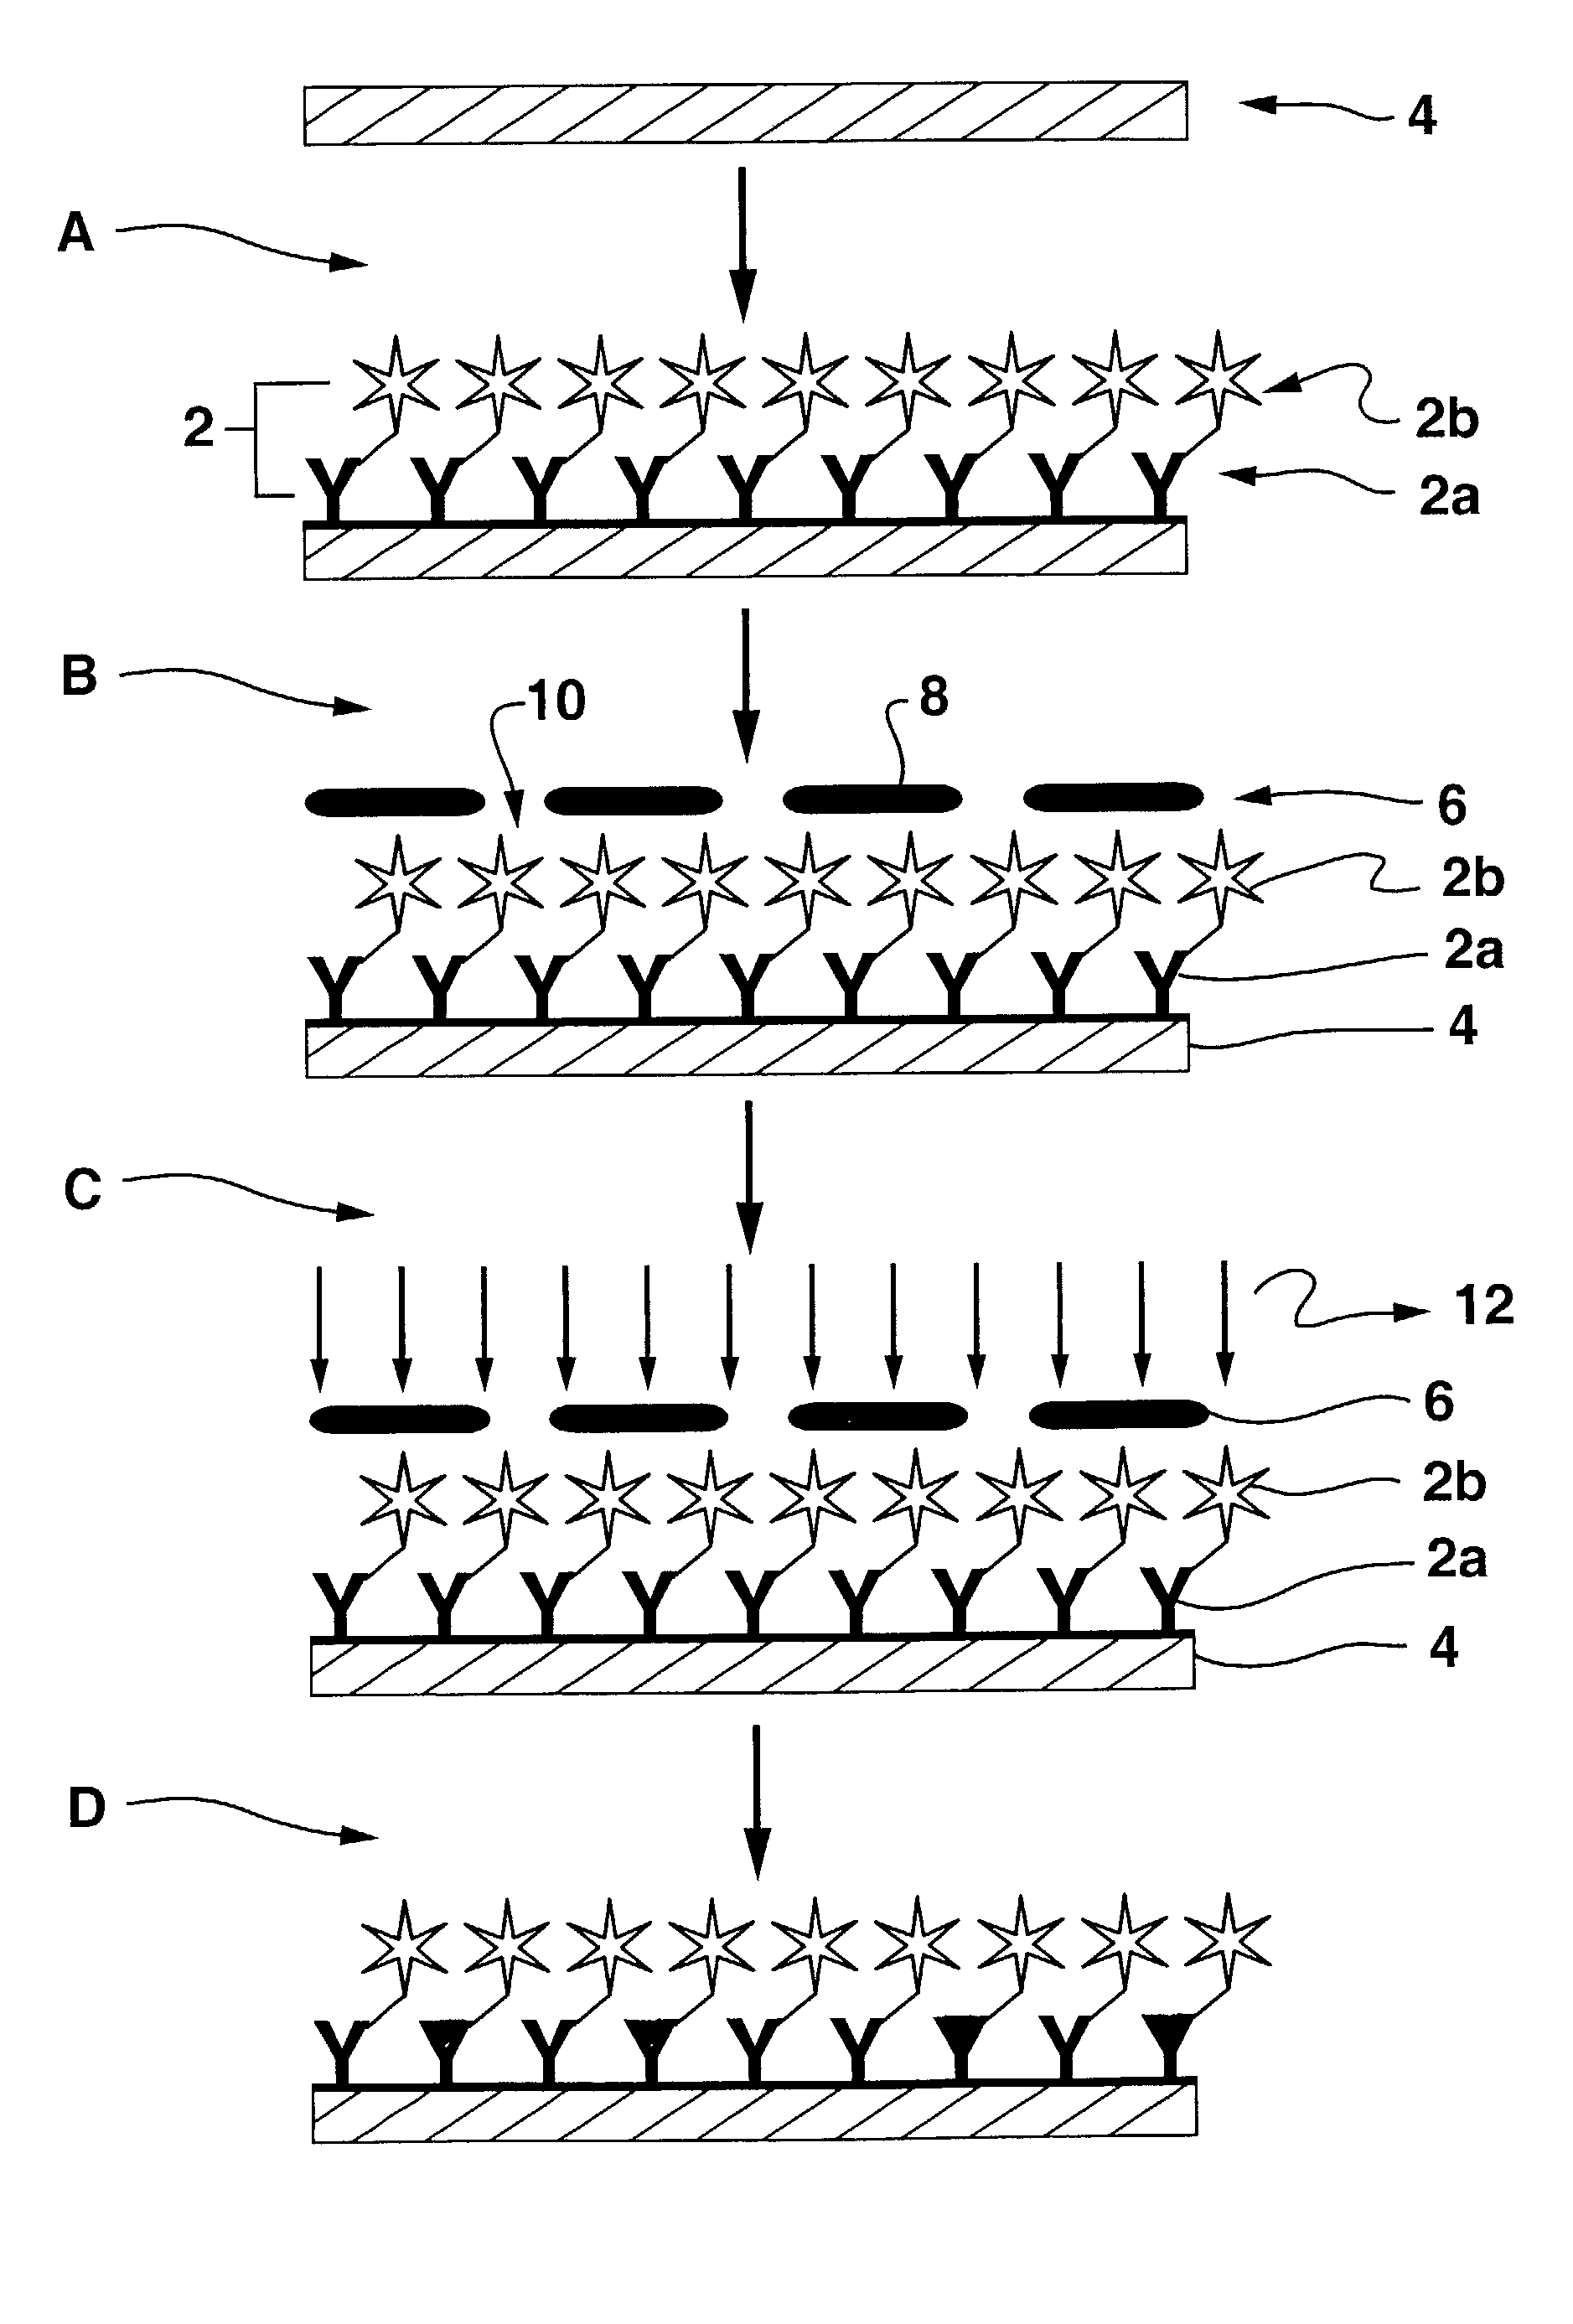 Diffraction-based diagnostic devices